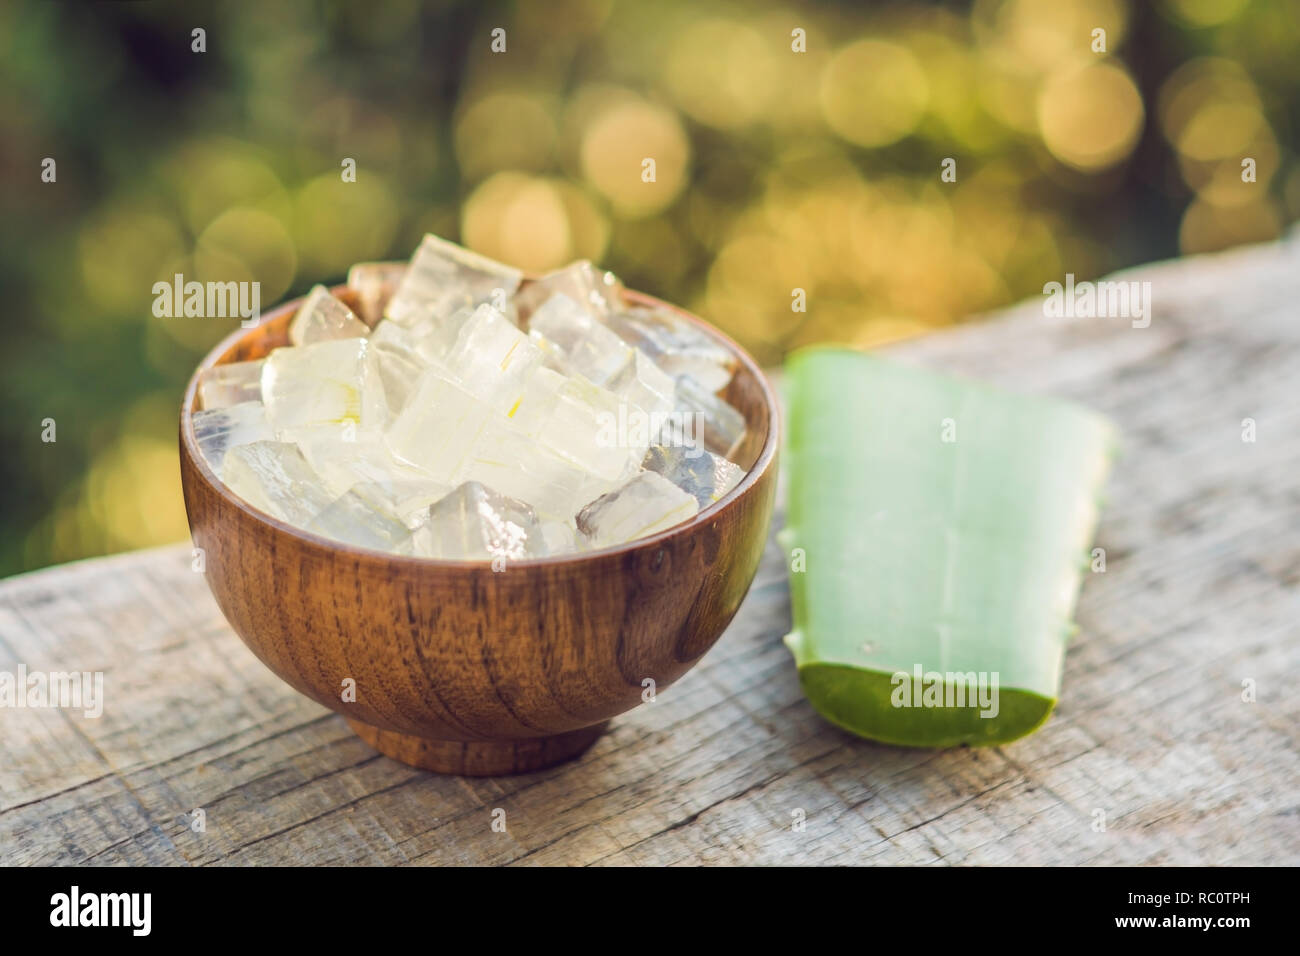 Aloe vera and aloe cubes in a wooden bowl. Aloe Vera gel almost use in food, medicine and beauty industry. Stock Photo